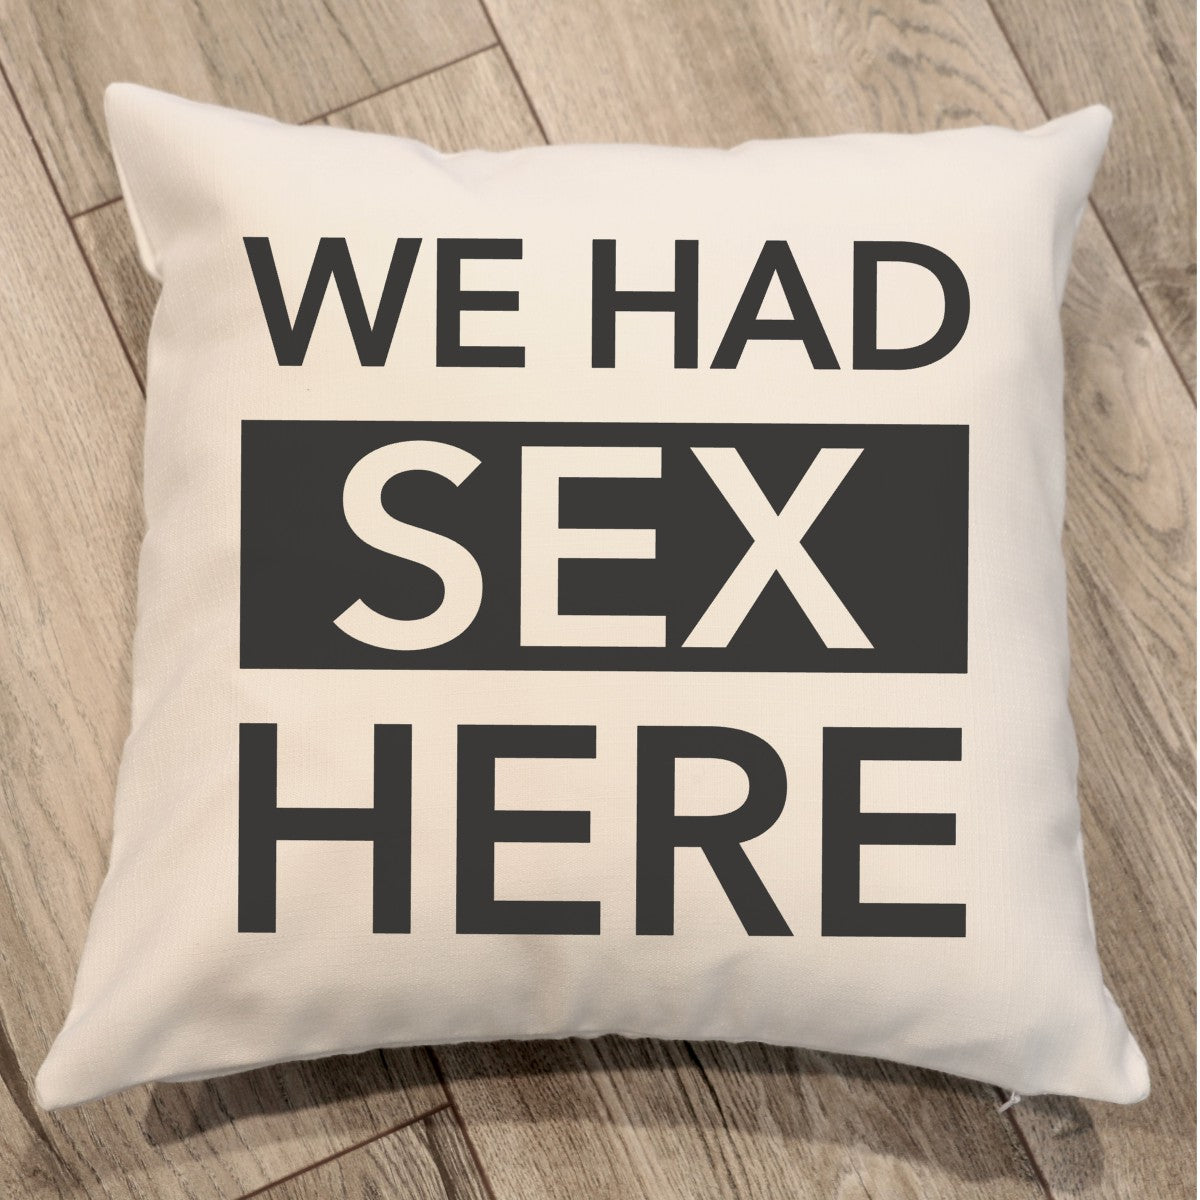 We Had $ex here/And here Pillows